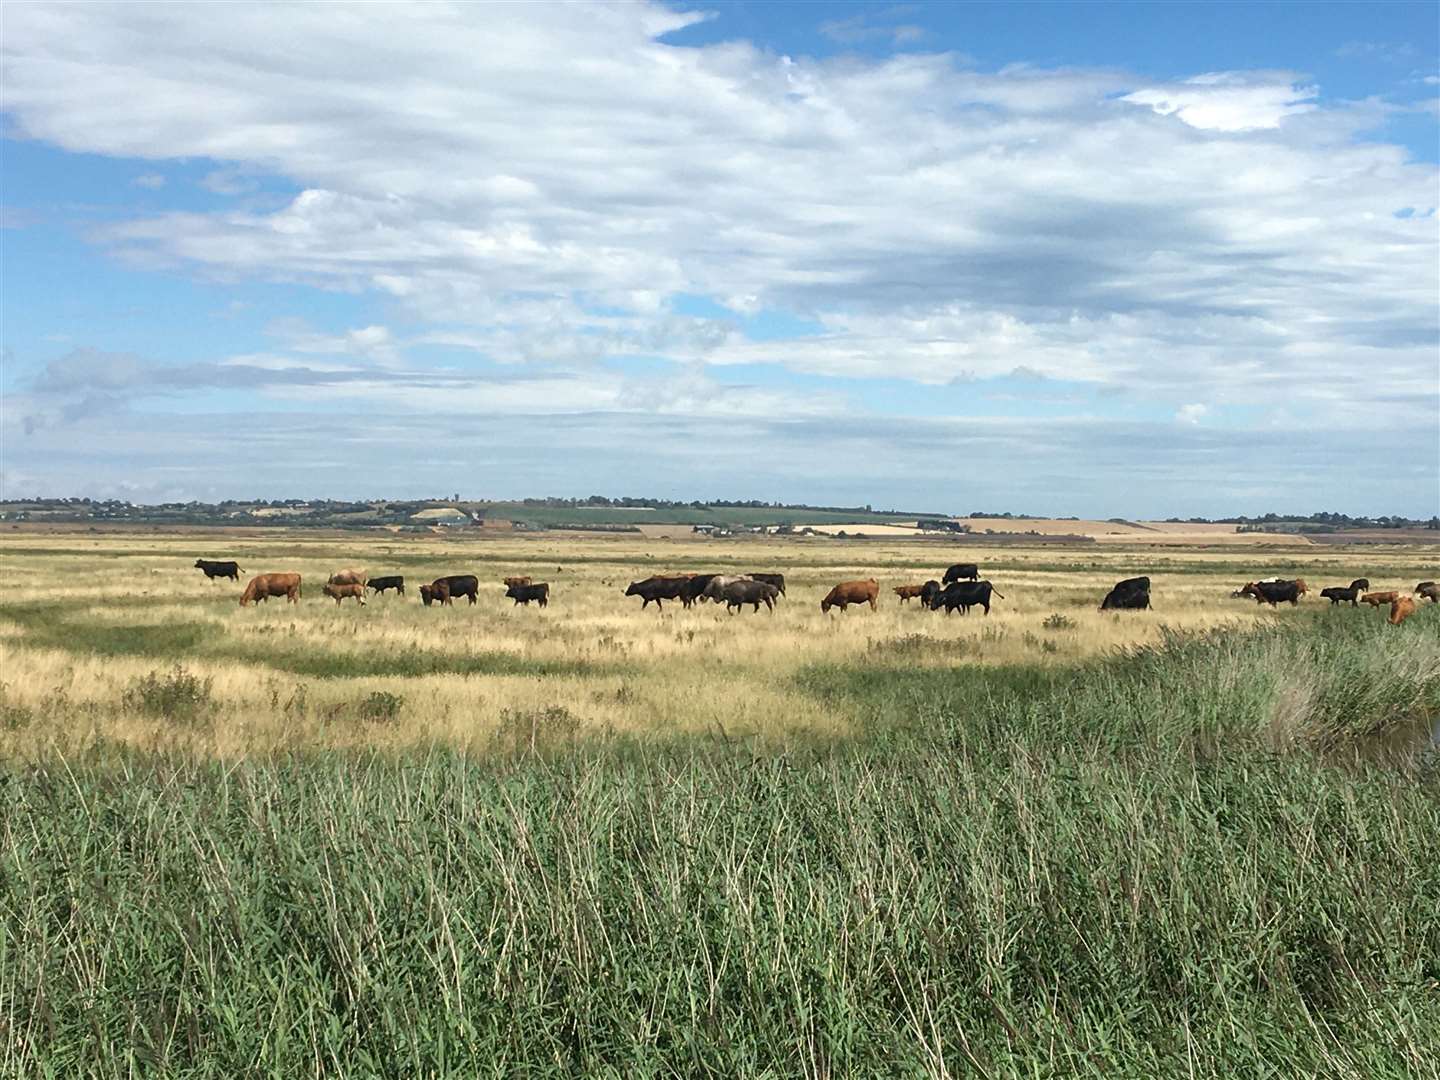 Elmley Nature Reserve is the perfect place to spot local wildlife after lunch